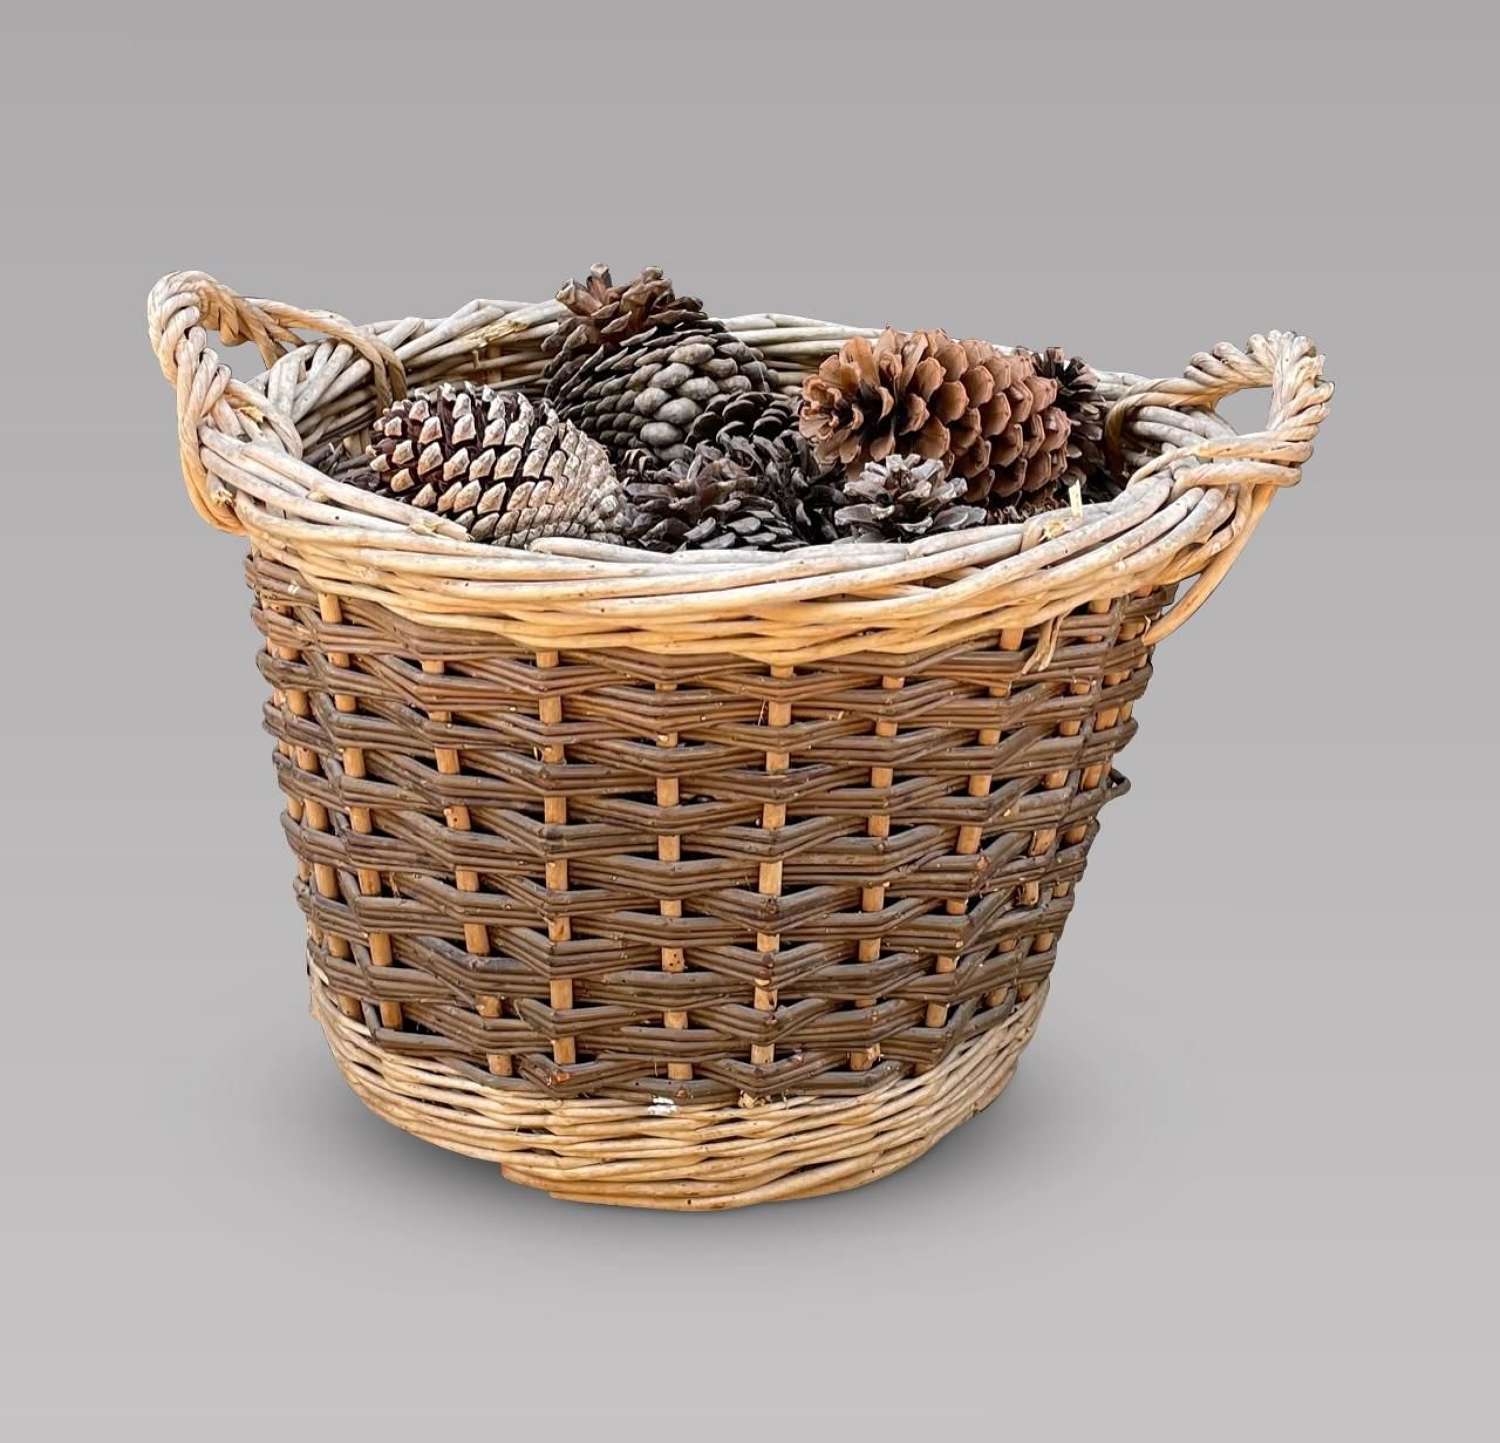 An Attractive Small Round Wicker Basket with Handles